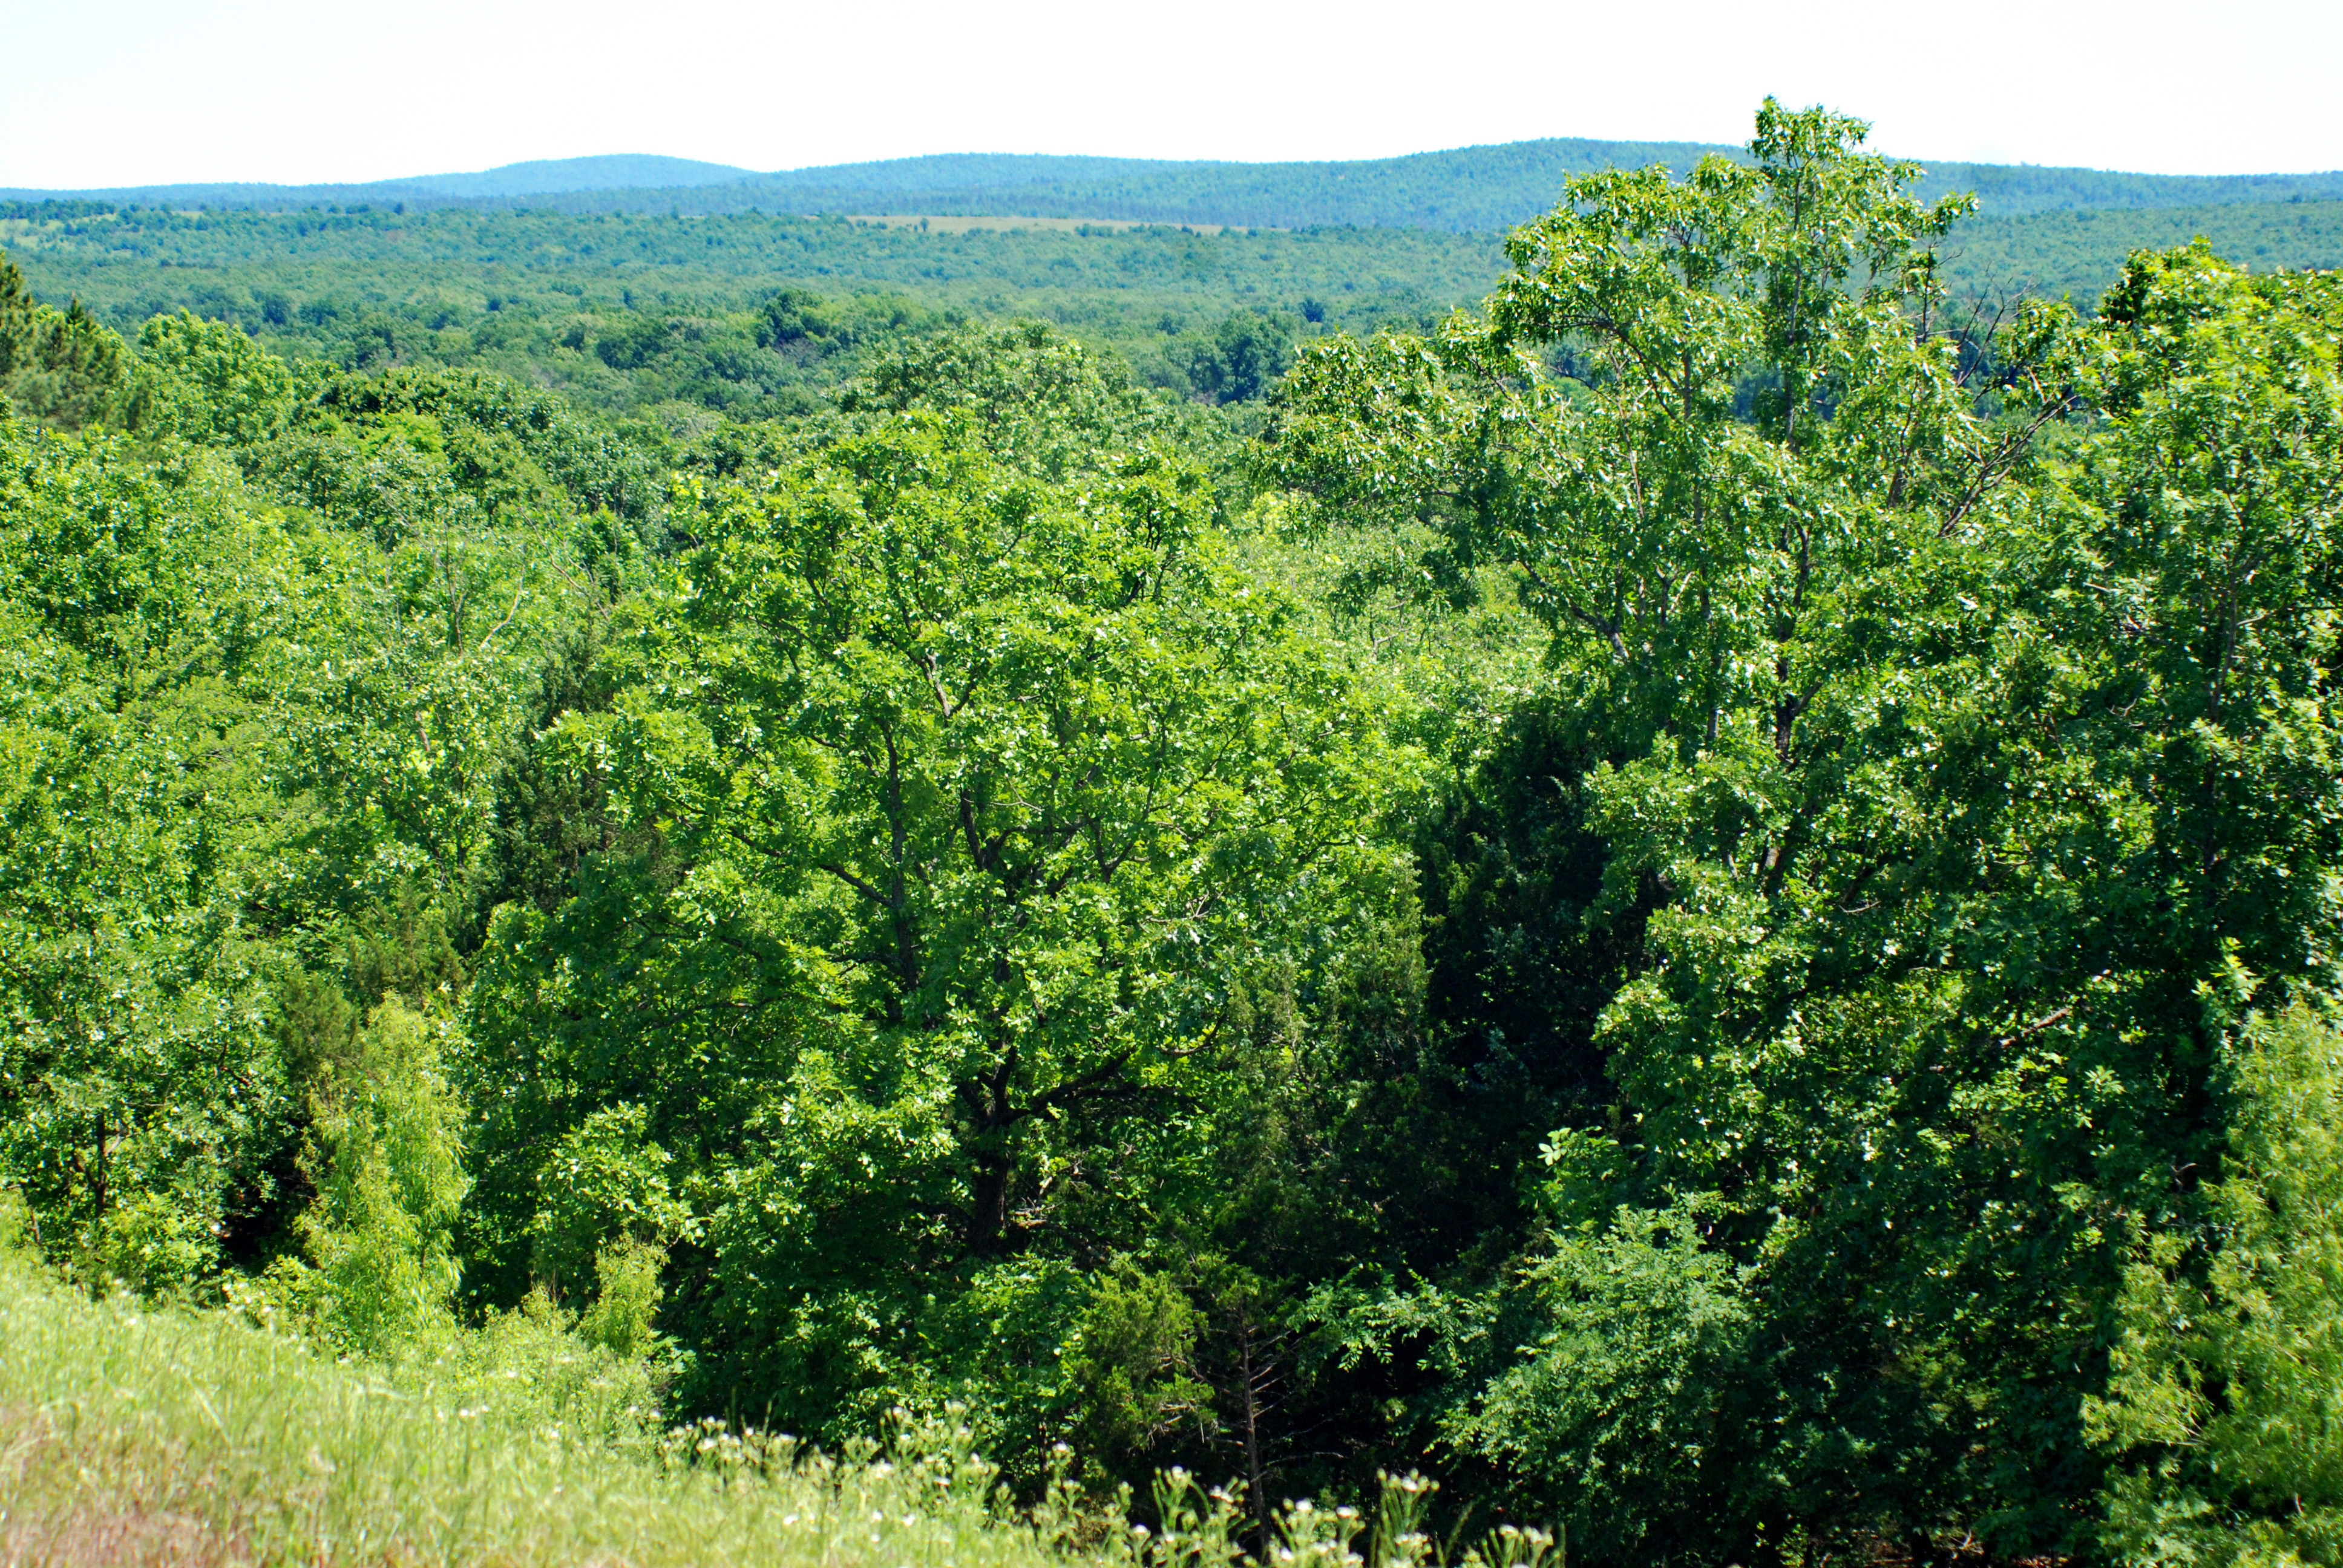 Ozark Mountain forests